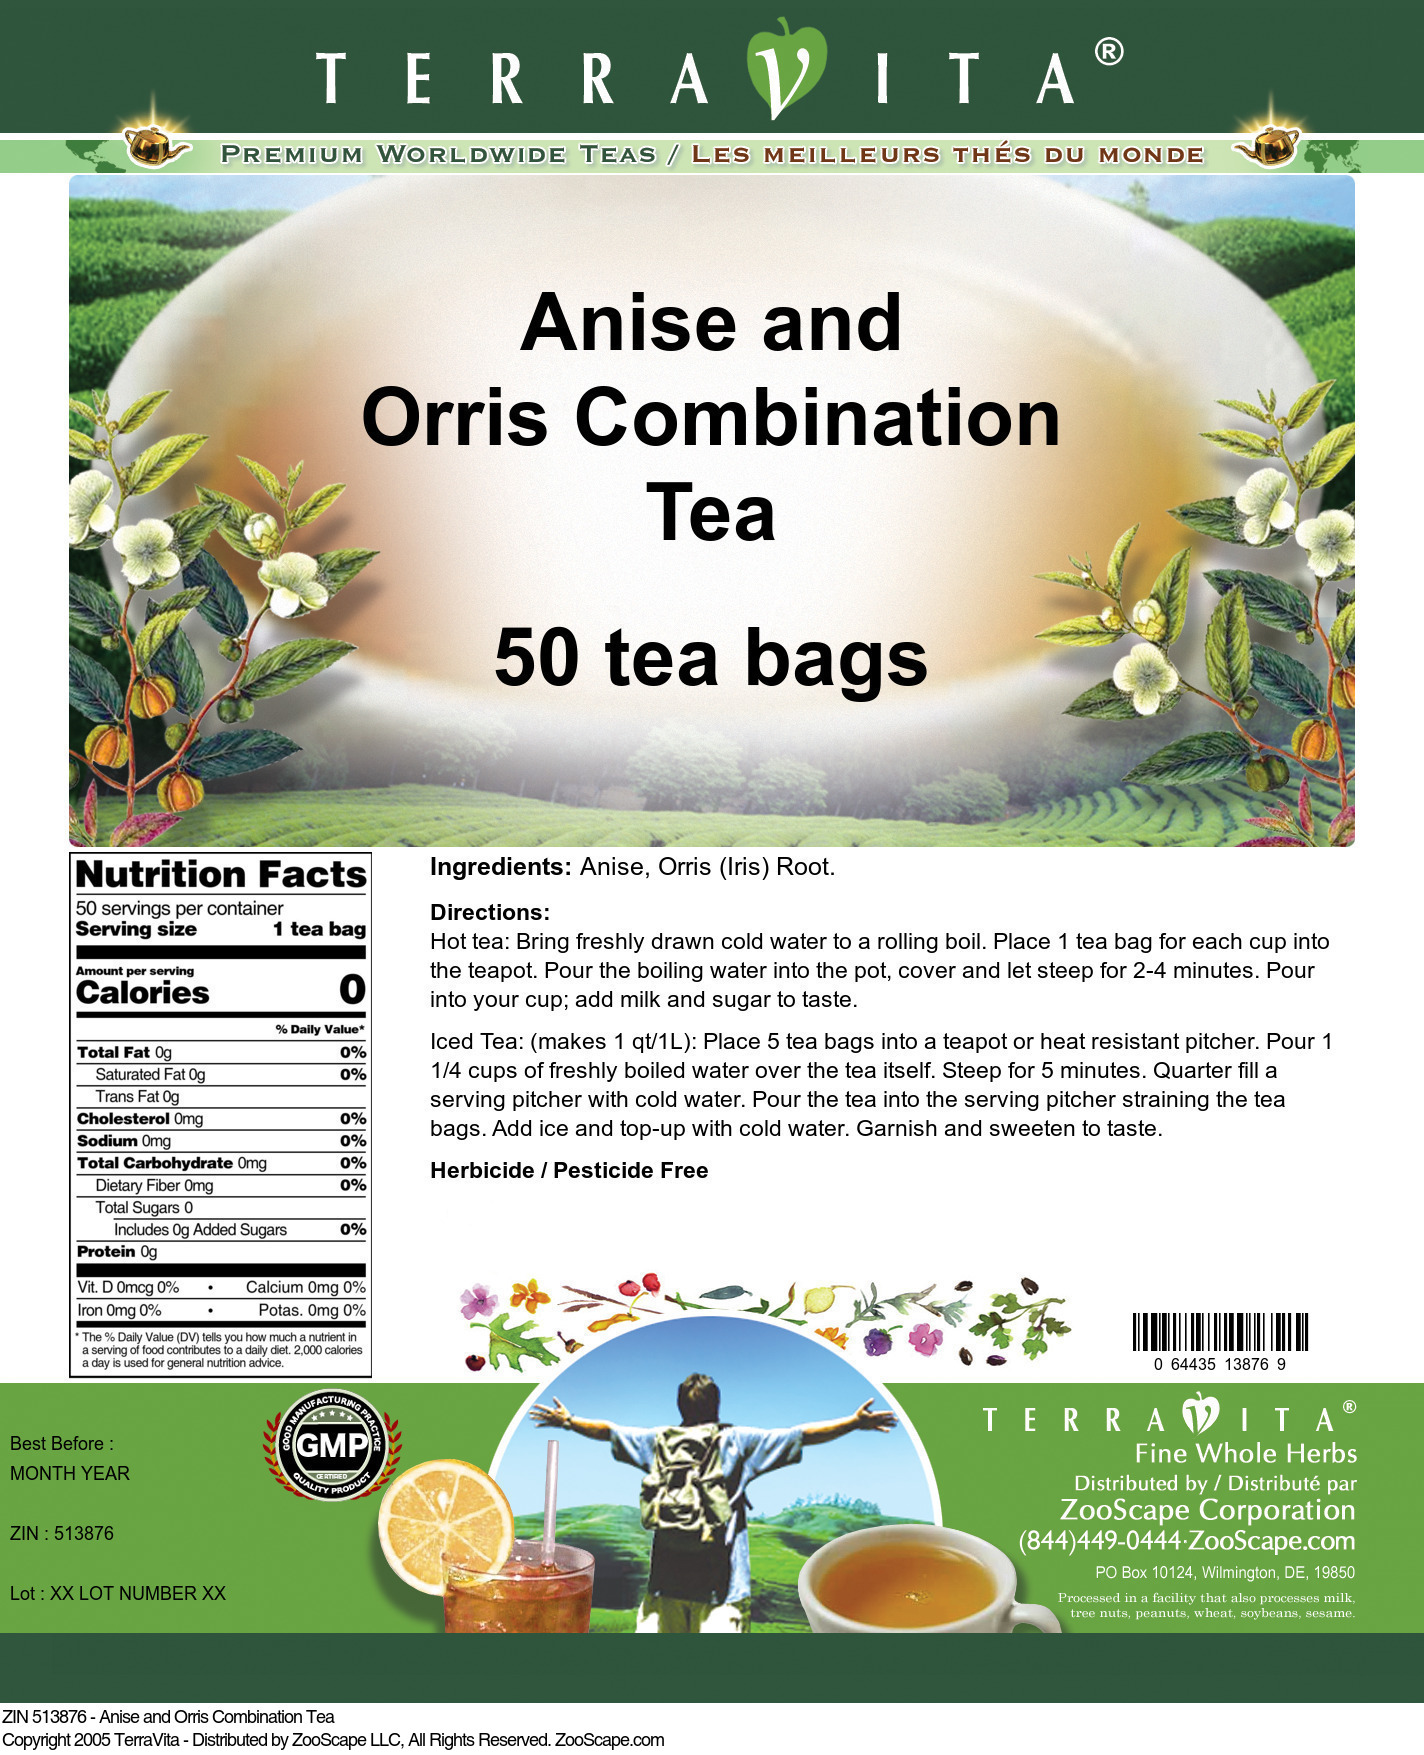 Anise and Orris Combination Tea - Label